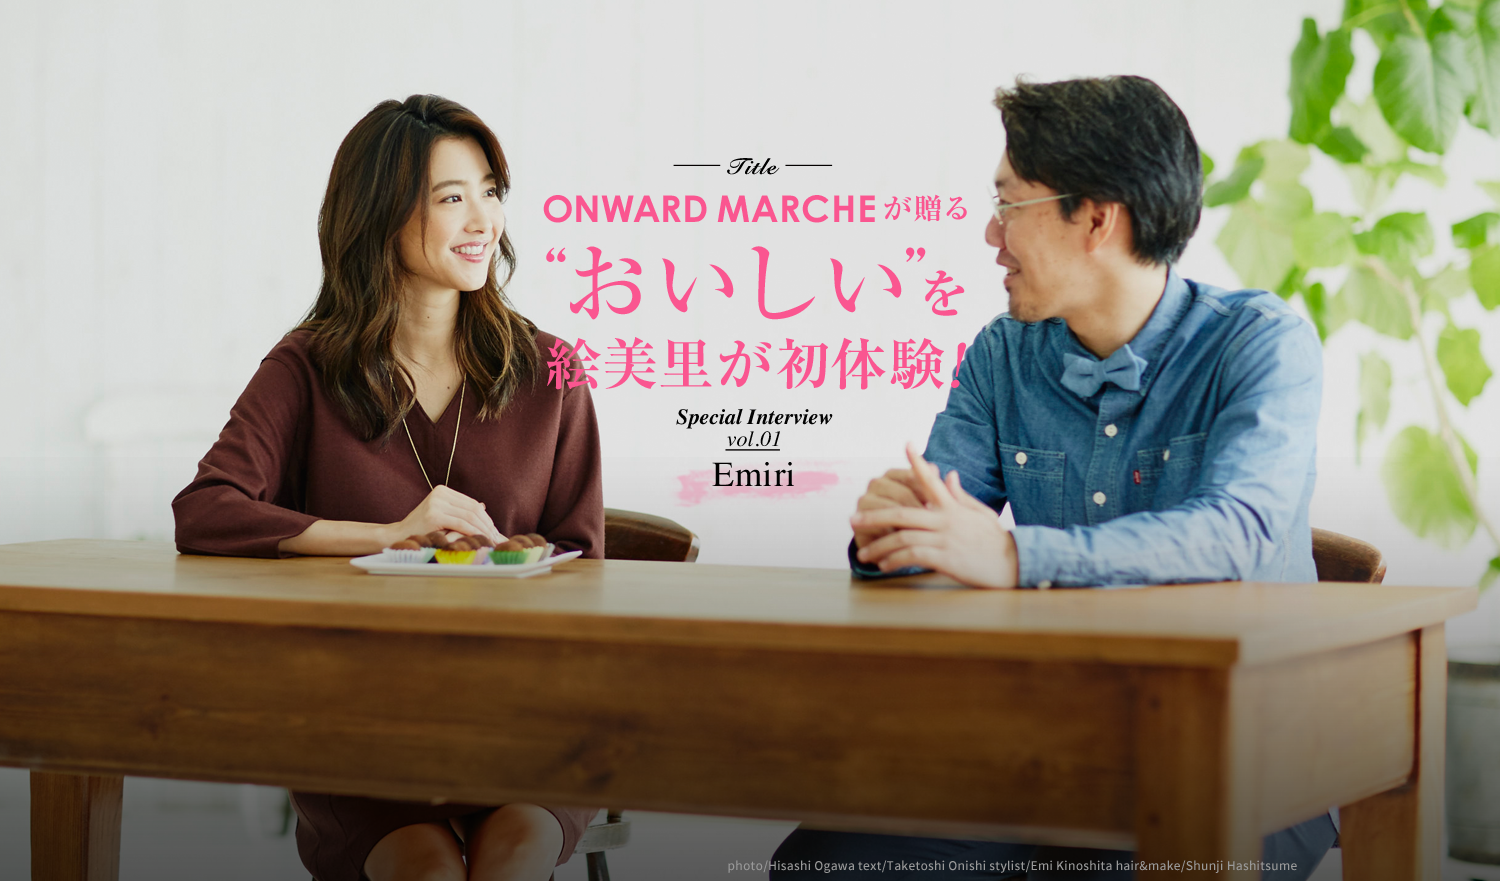 ONWARD MARCHEが贈る “おいしい”を絵美里が初体験！ Special Interview vol.01 Emiri